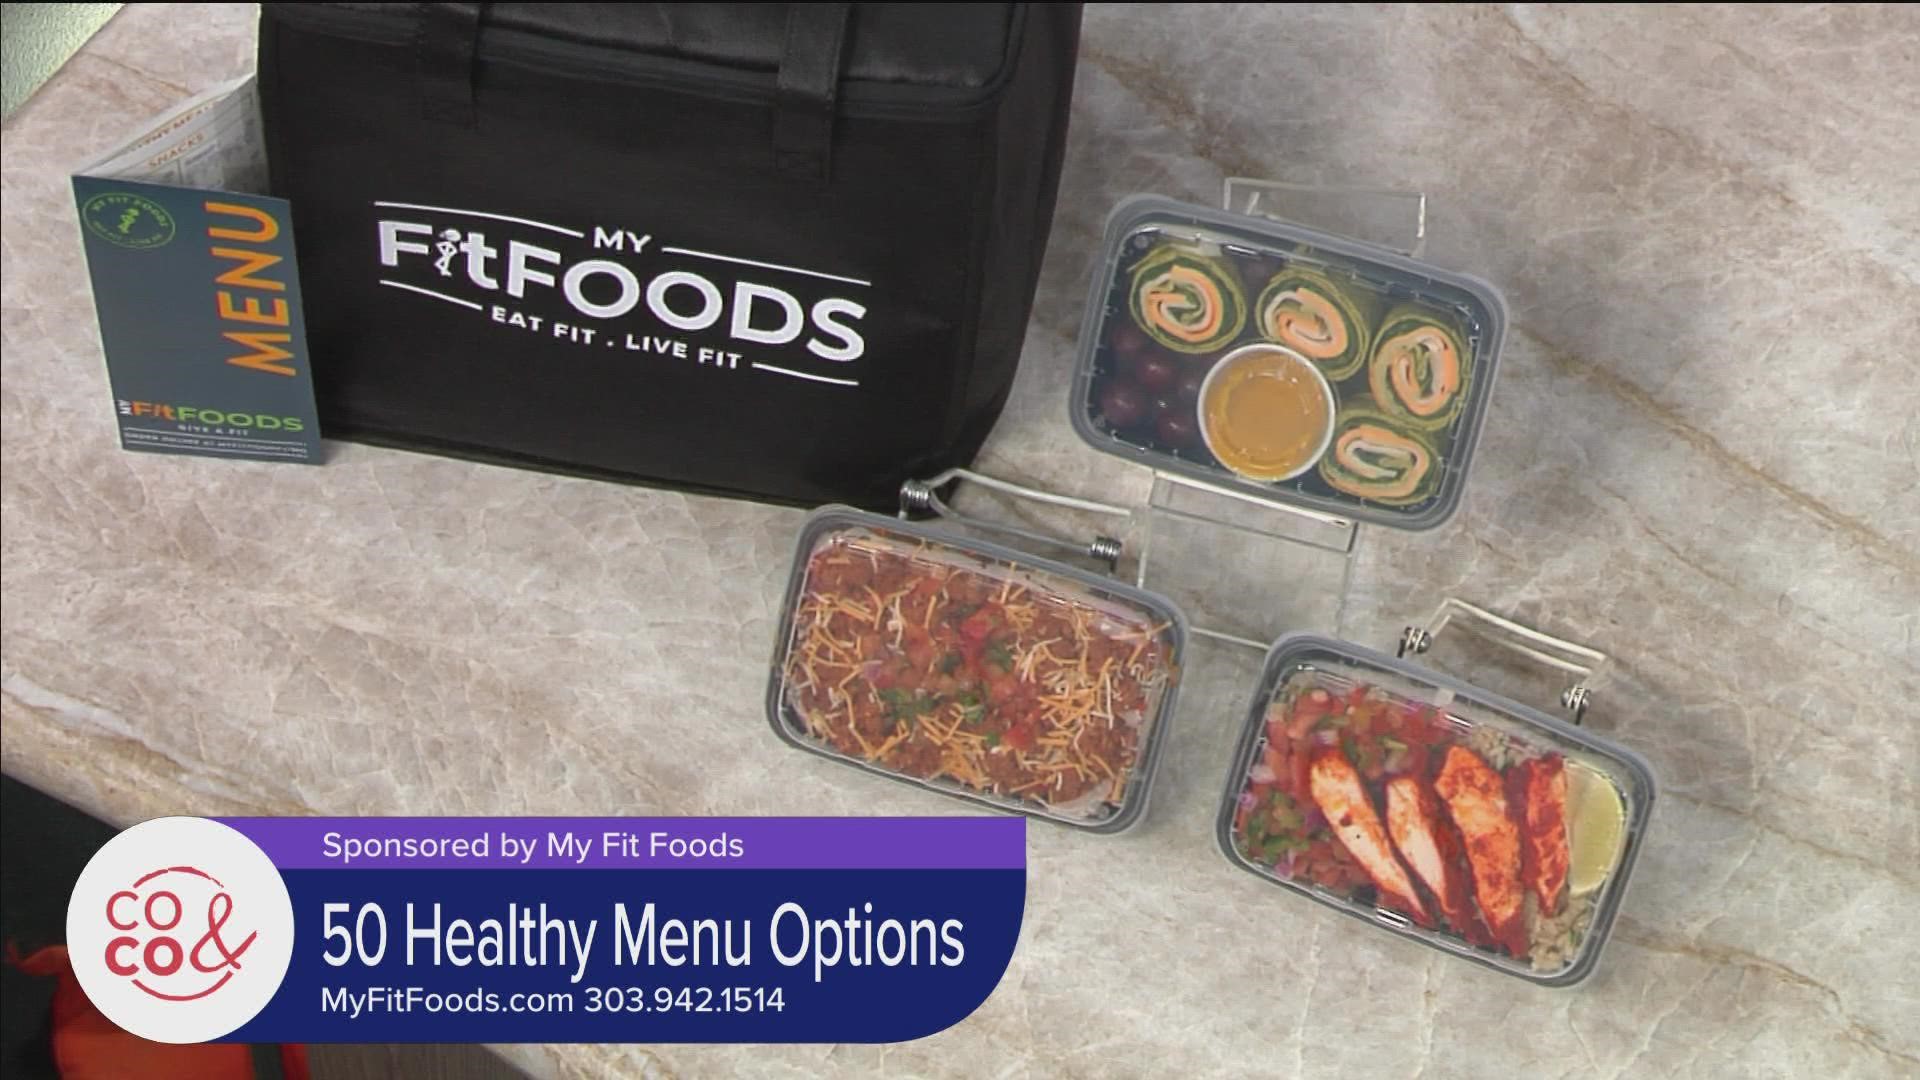 MyFitFoods has 2 locations in Denver! Visit them in the Tech Center and Cherry Creek, or visit MyFitFoods.com to get started.